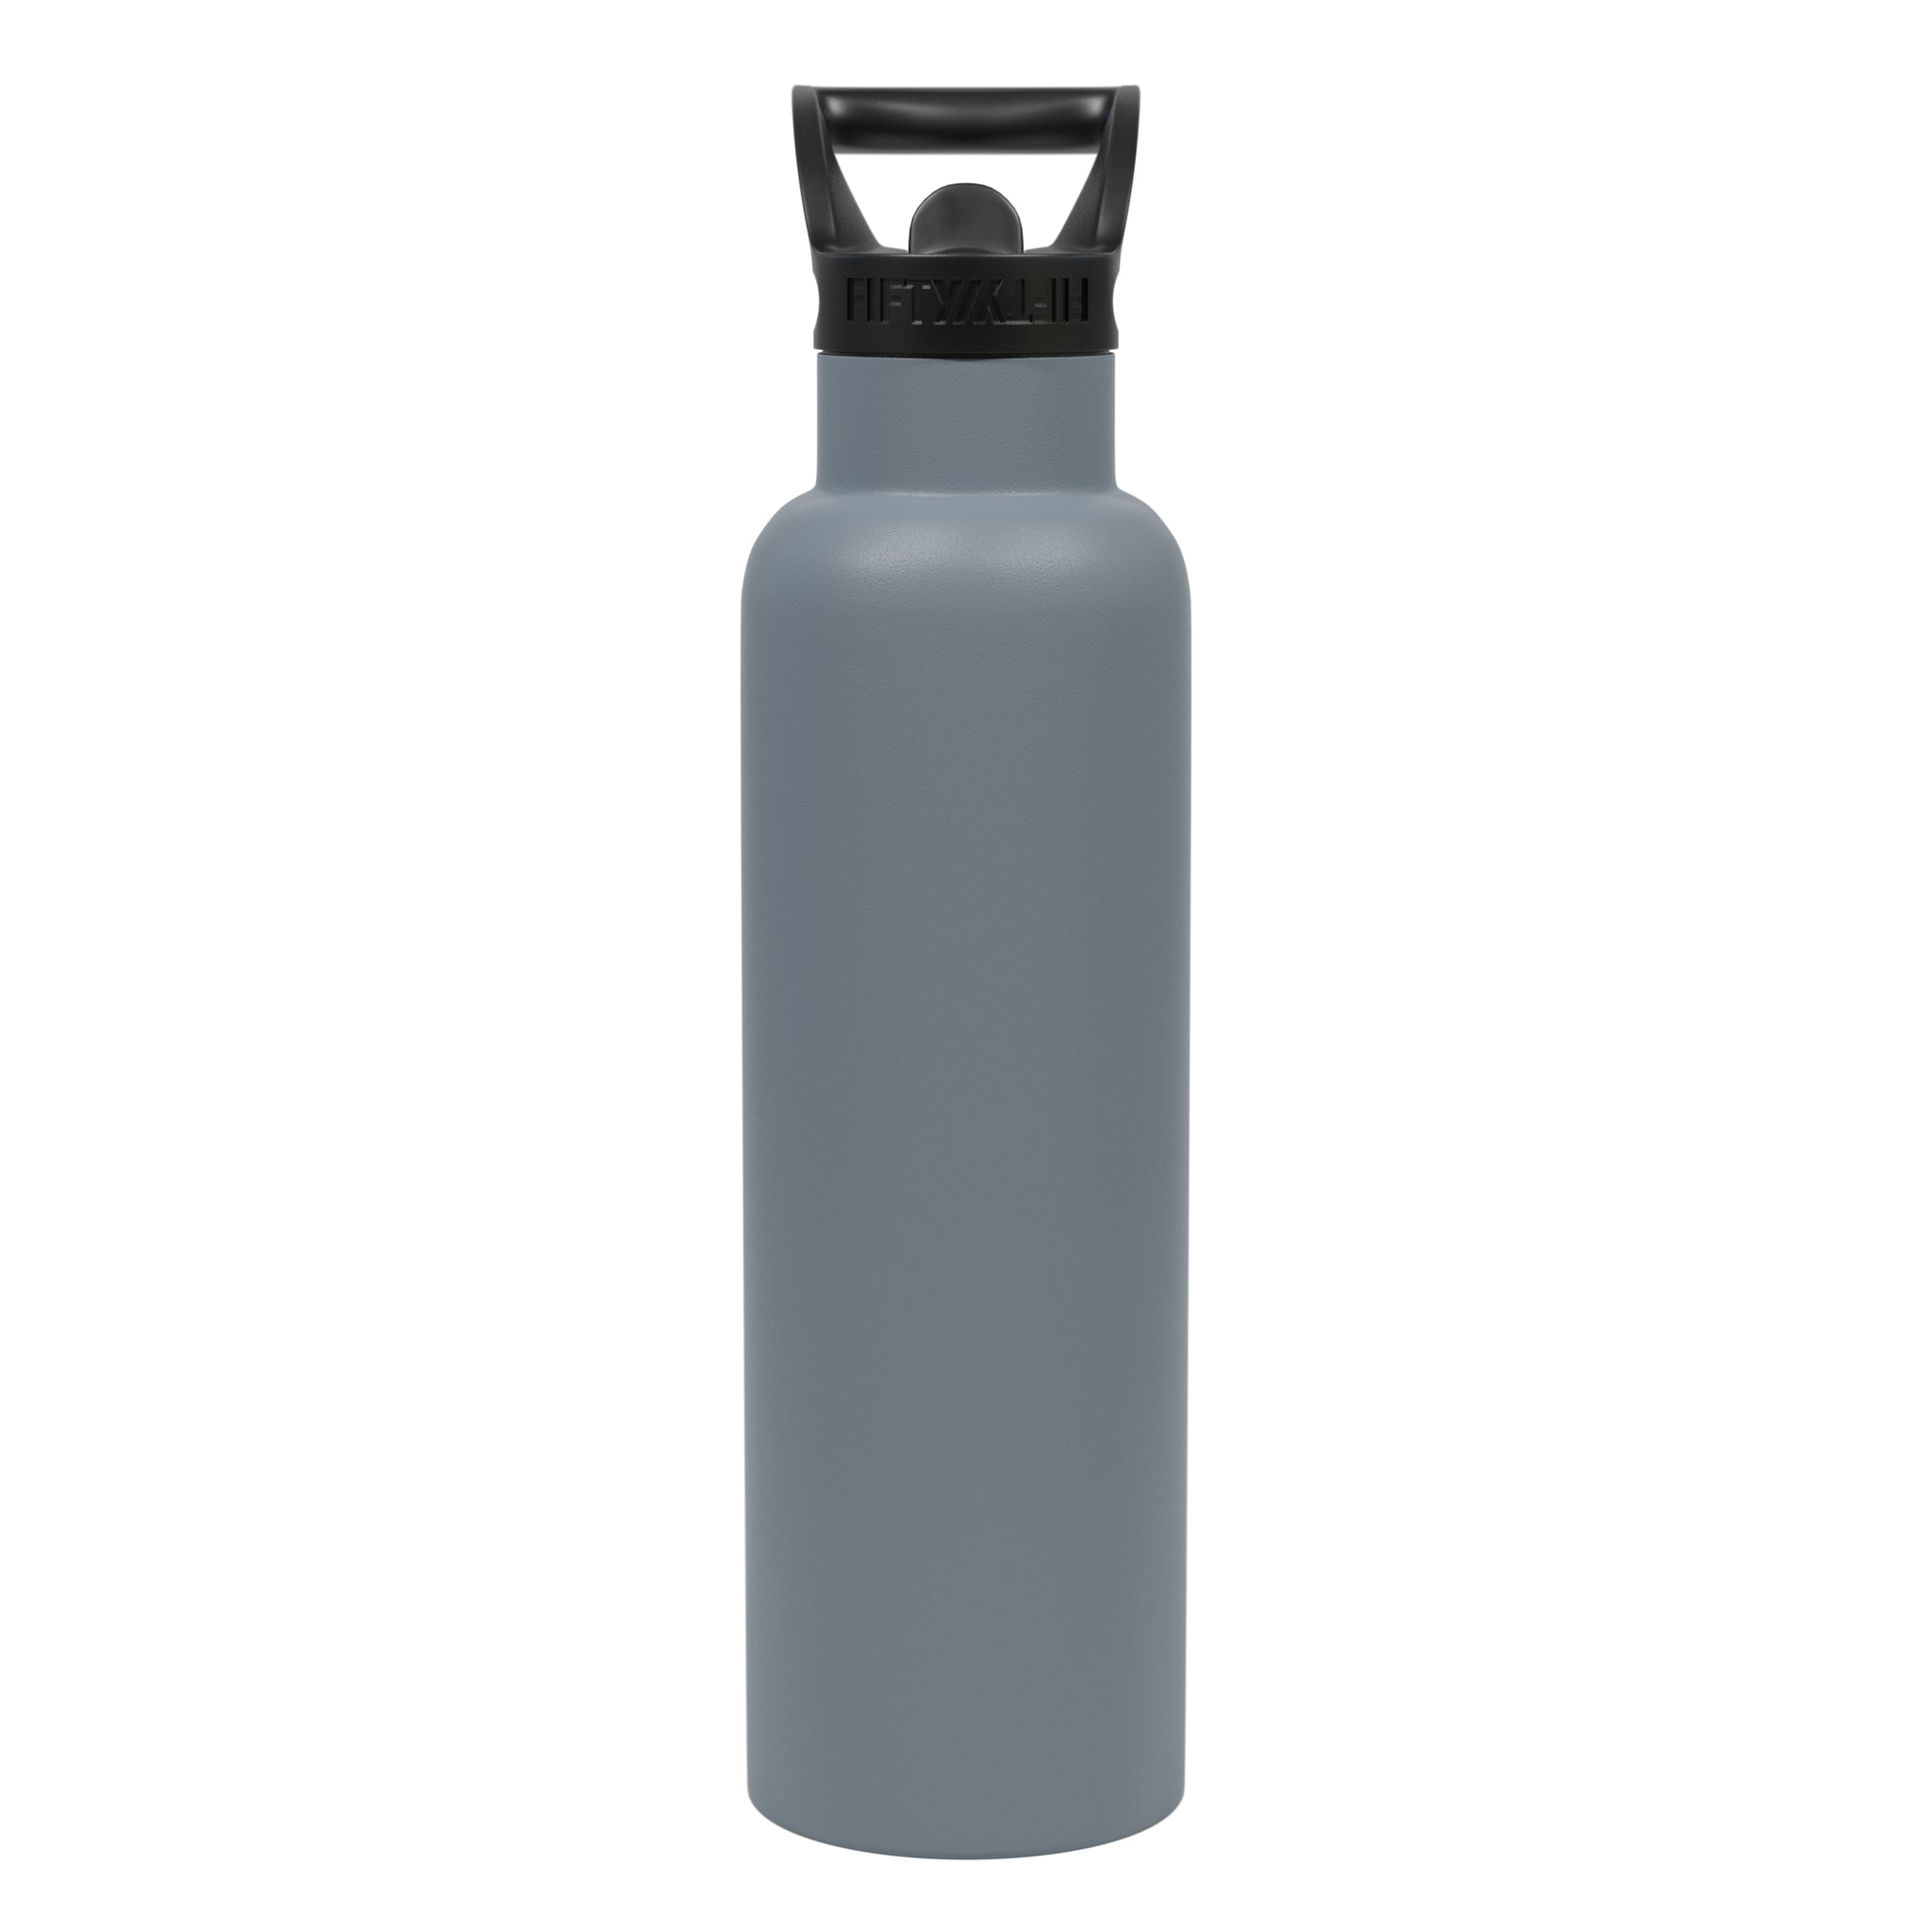 Liberty 12 oz. Charcoal Insulated Stainless Steel Water Bottle with D-Ring Lid, Grey